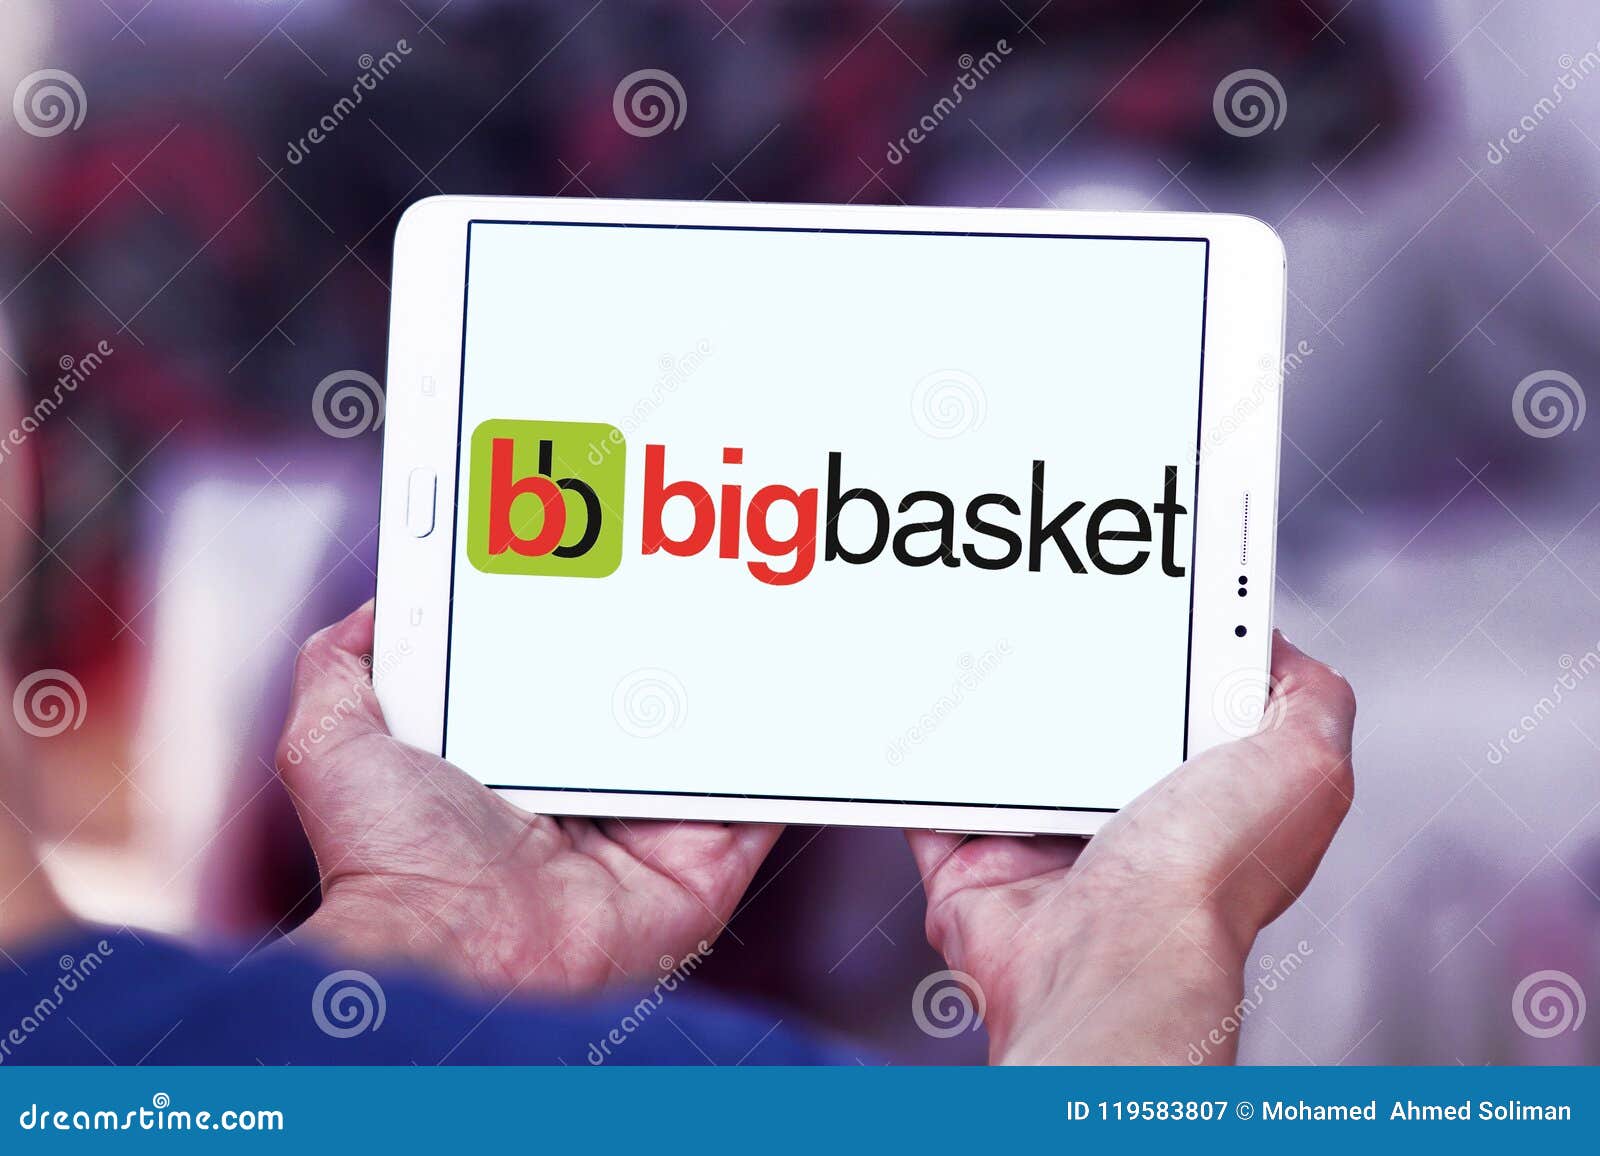 Welcome to Big Basket-cheohanoi.vn